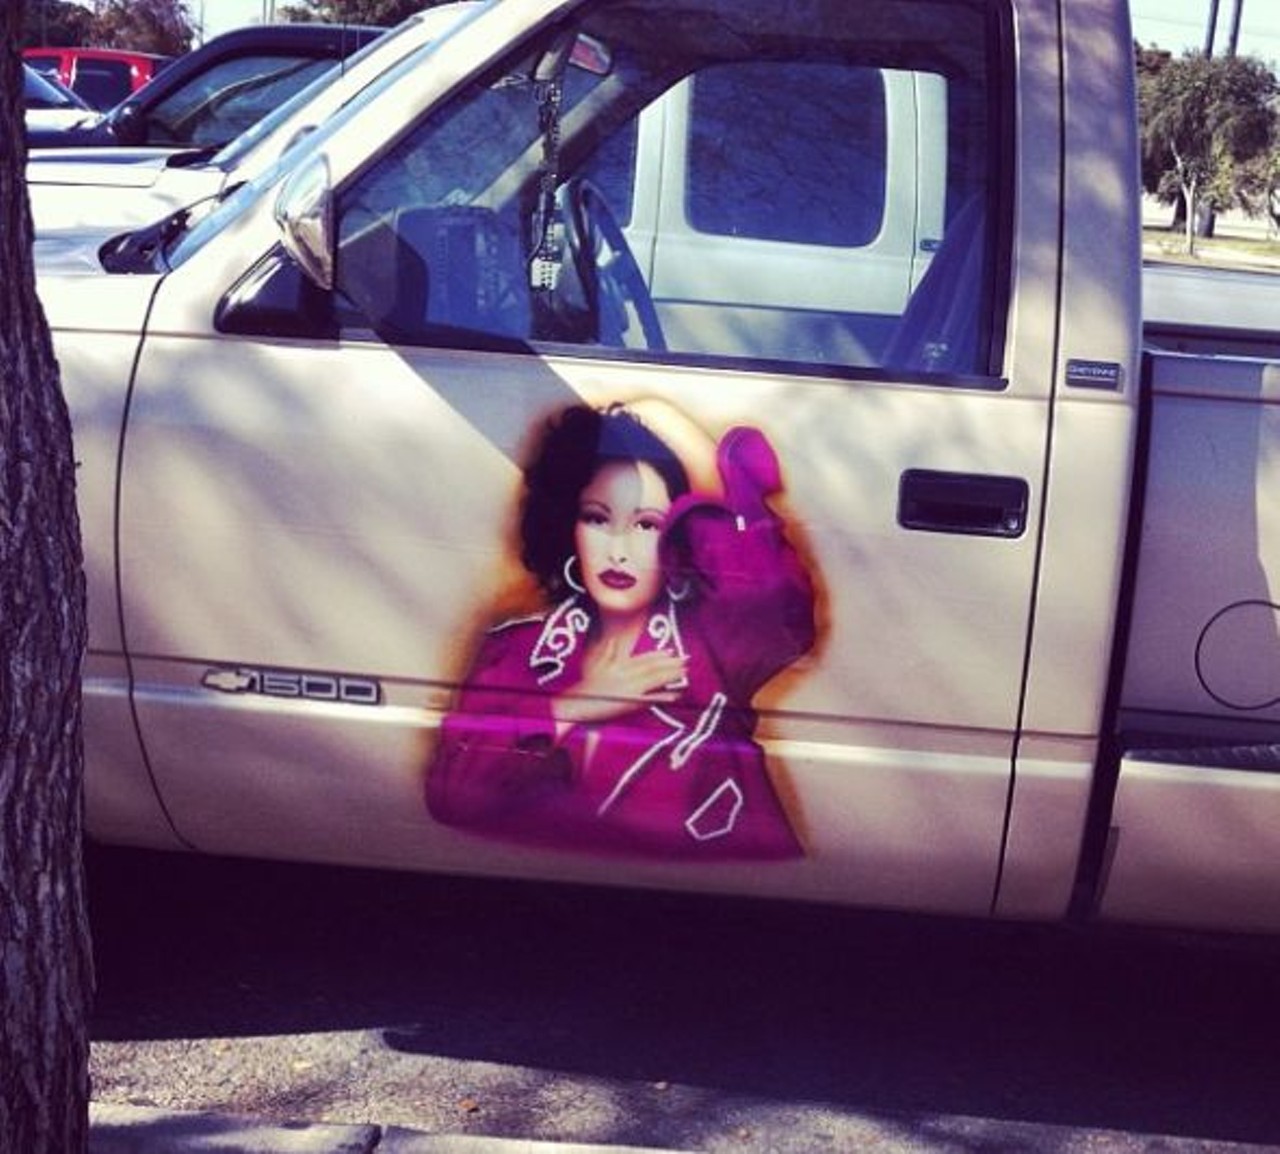 Our love for Selena knows no bounds
RIP Tejano Queen.
Photo via Instagram, meganpadillaaa